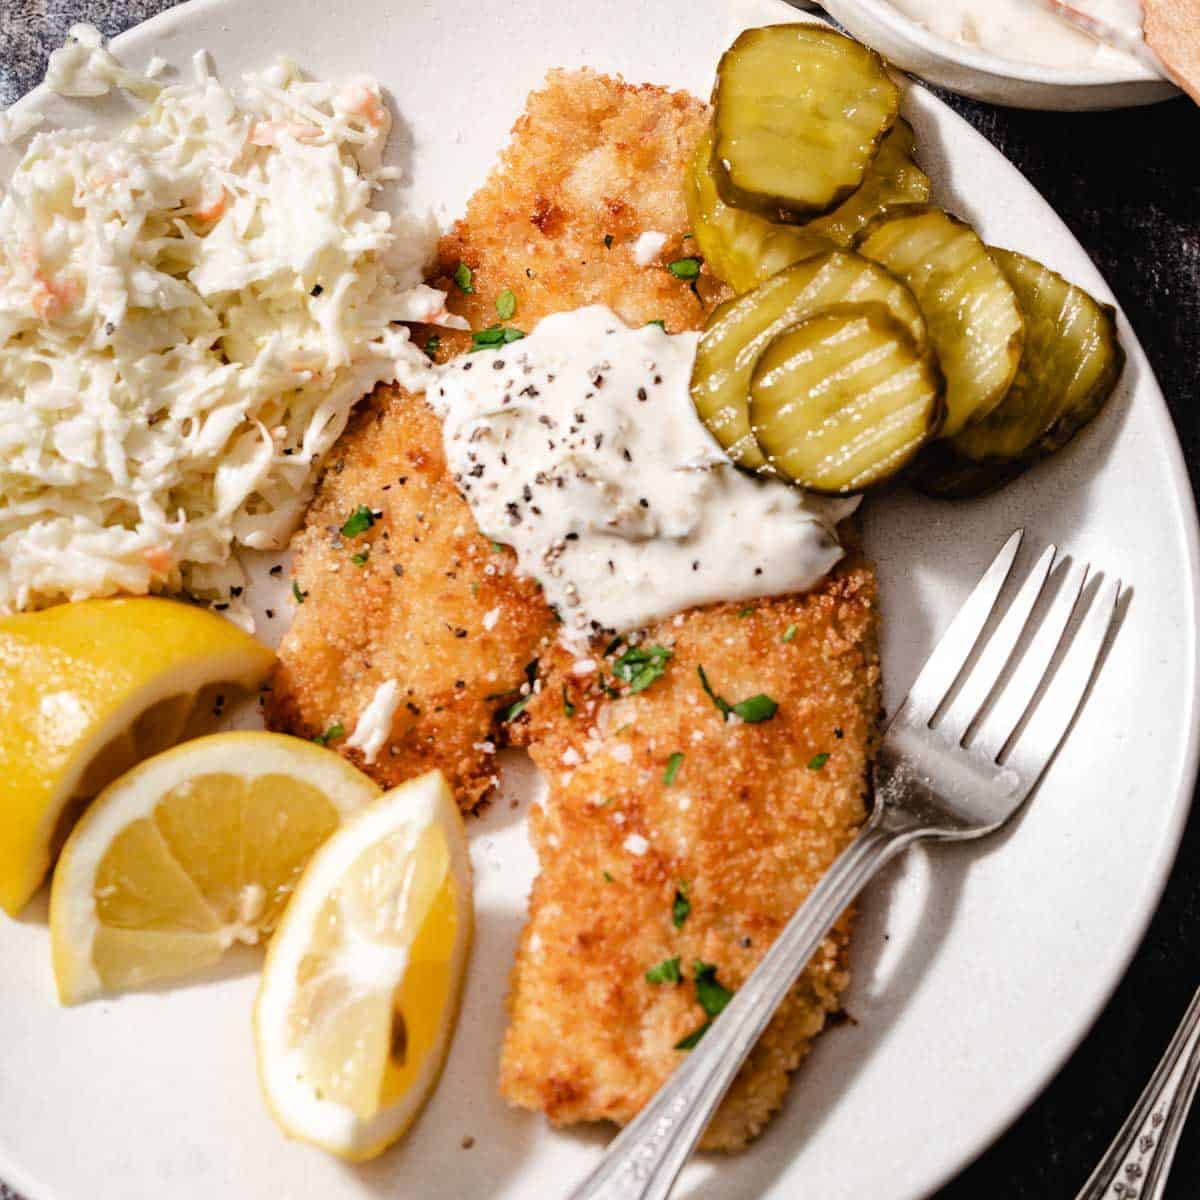 Panko-crusted snapper with pickles and cole slaw.